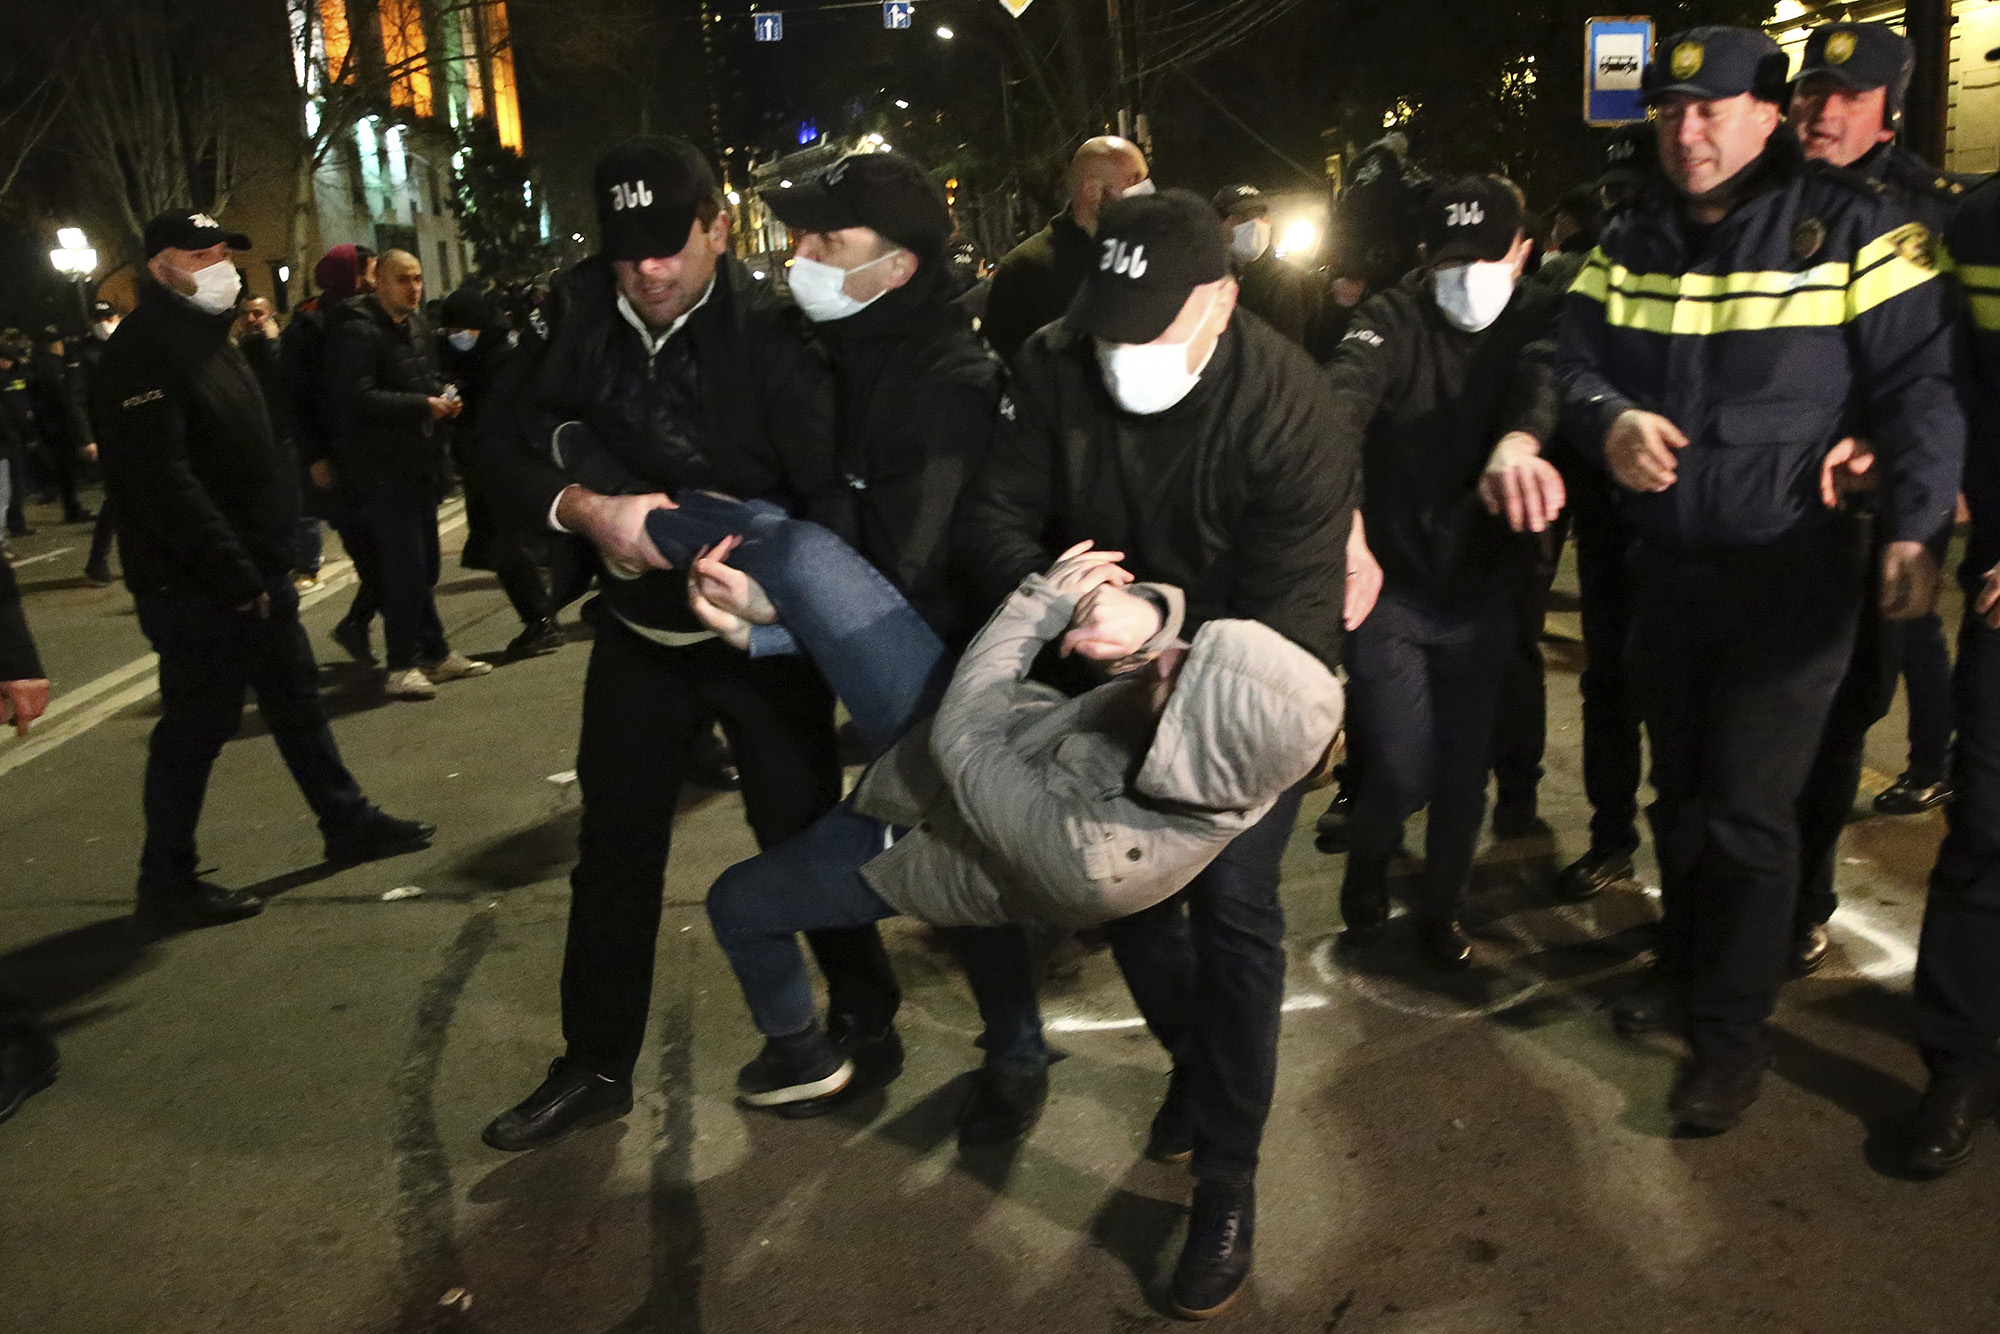 Georgian police detain a protester during a protest outside the Georgian parliament building in Tbilisi, Georgia, on March 8.